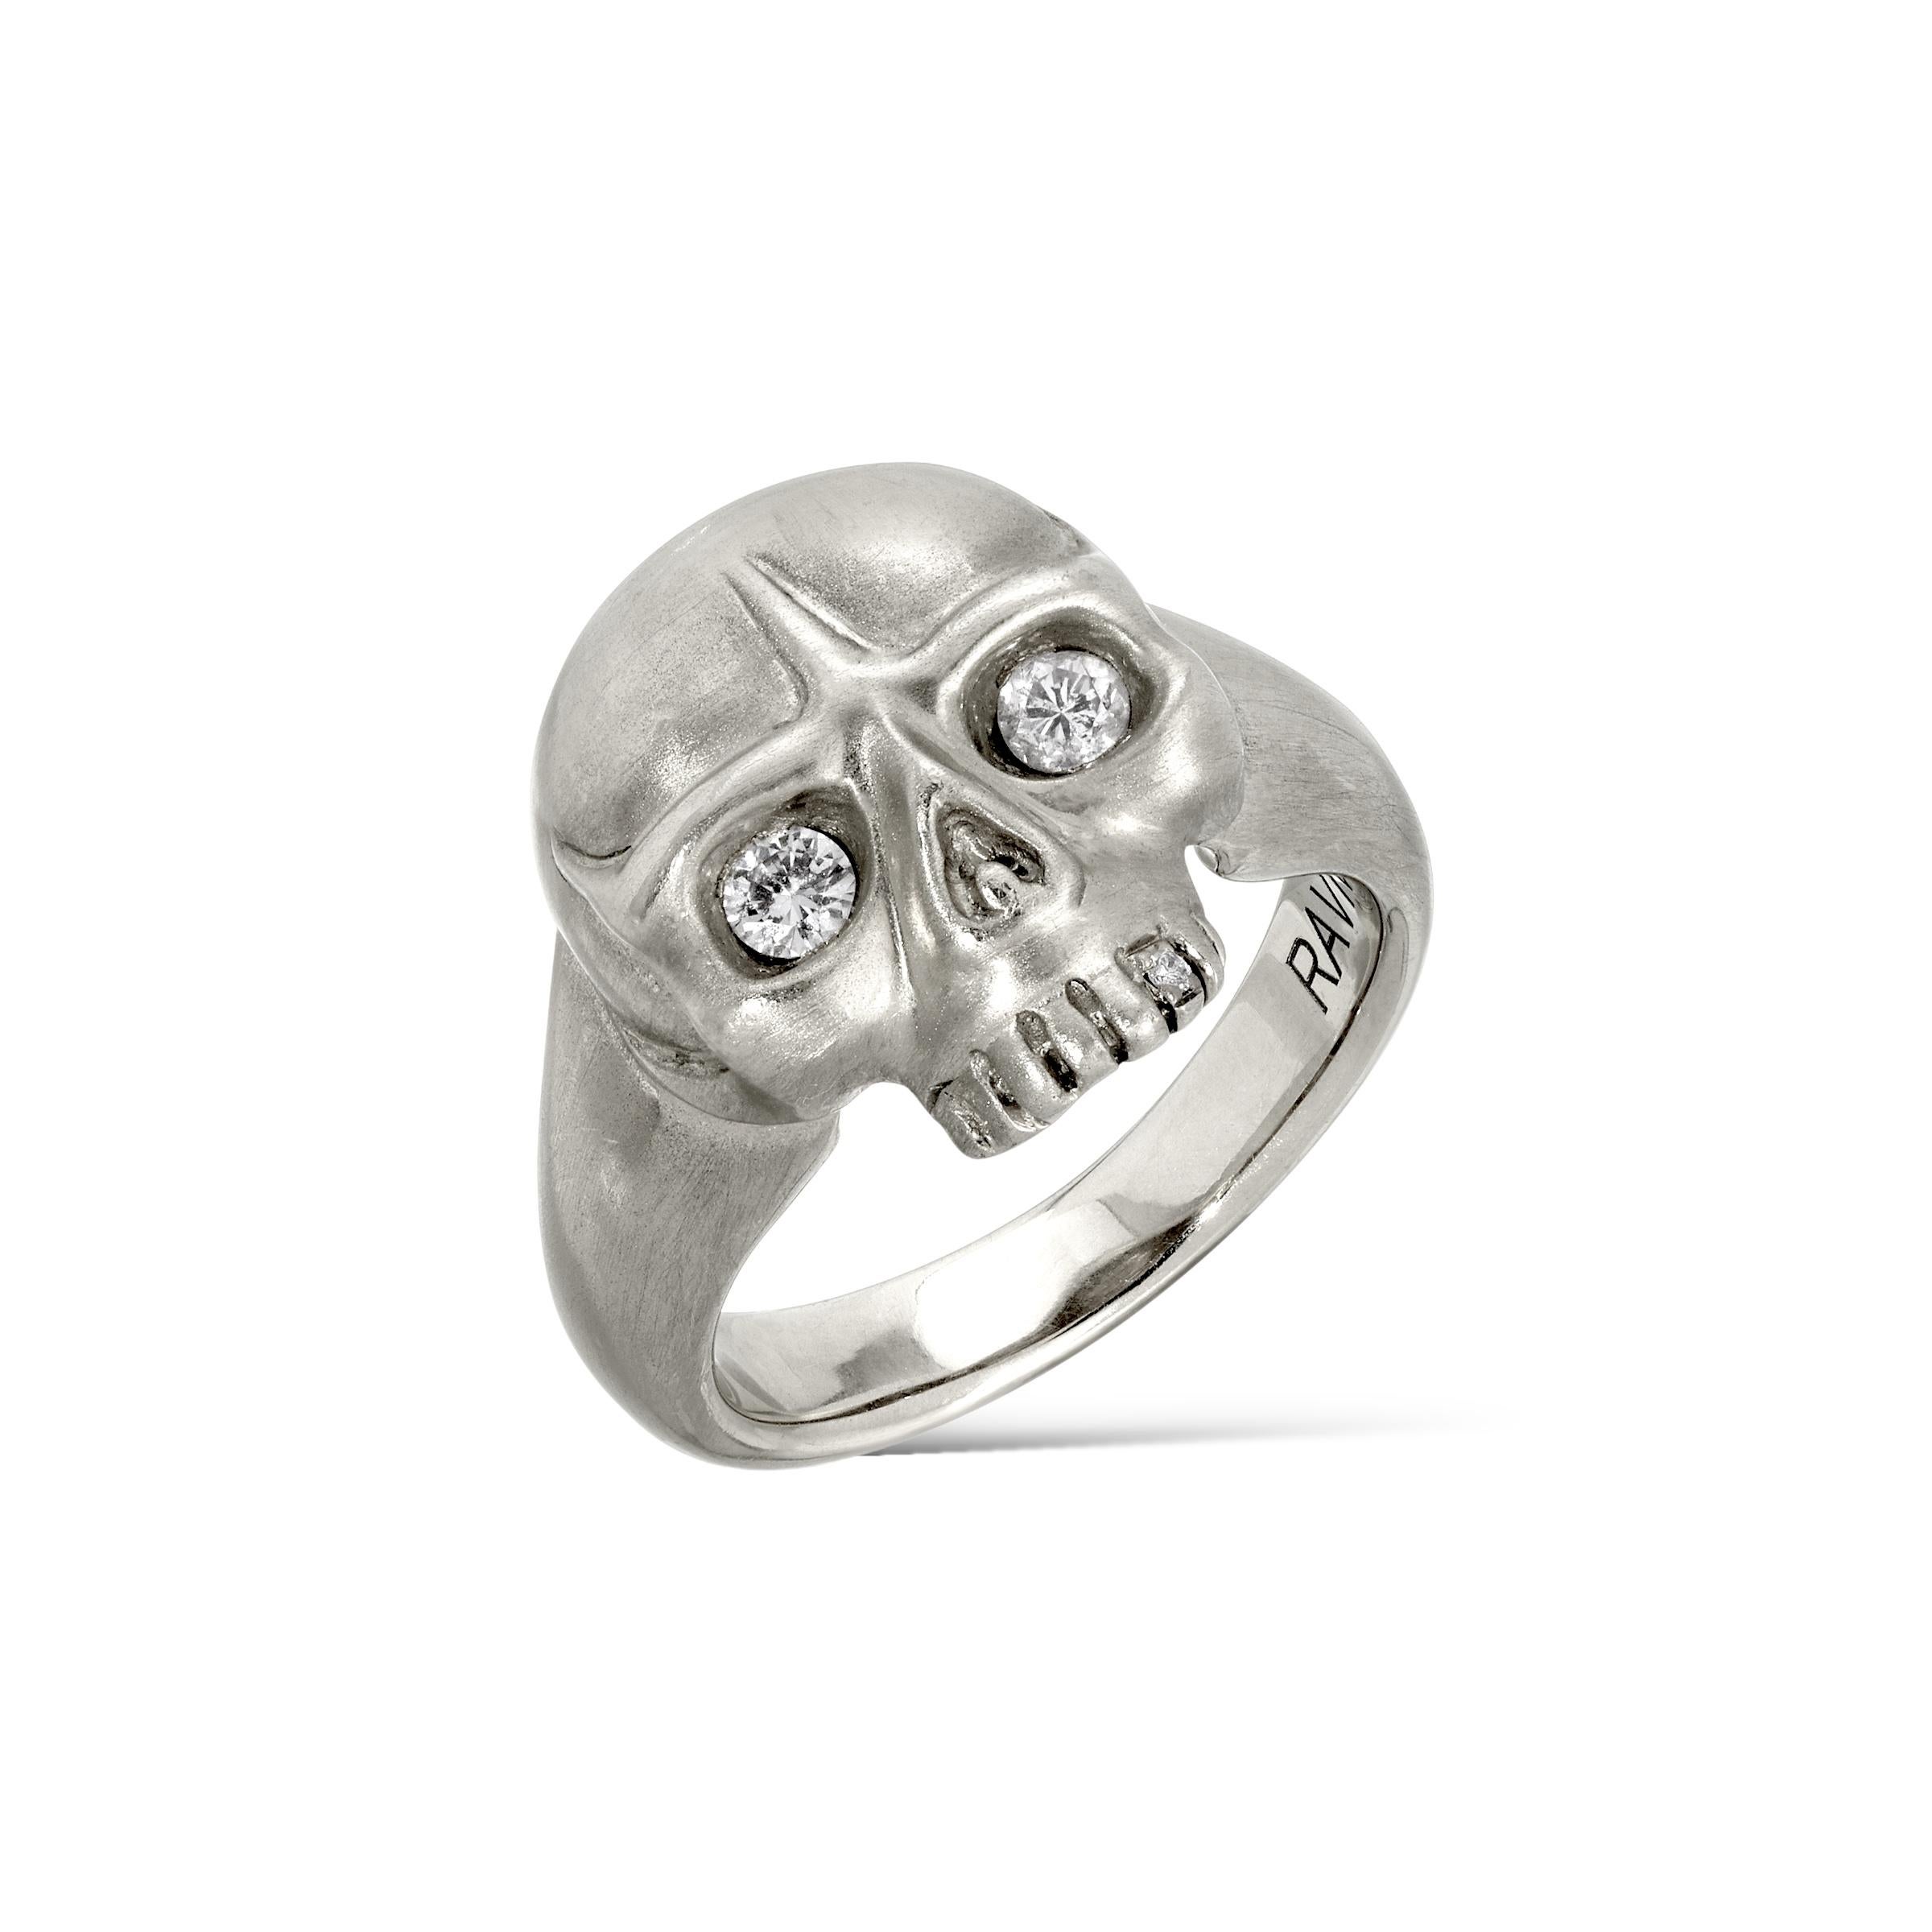 Contemporary House of RAVN, Jawless Sterling Silver Hand Carved Small Skull Ring, Diamonds For Sale